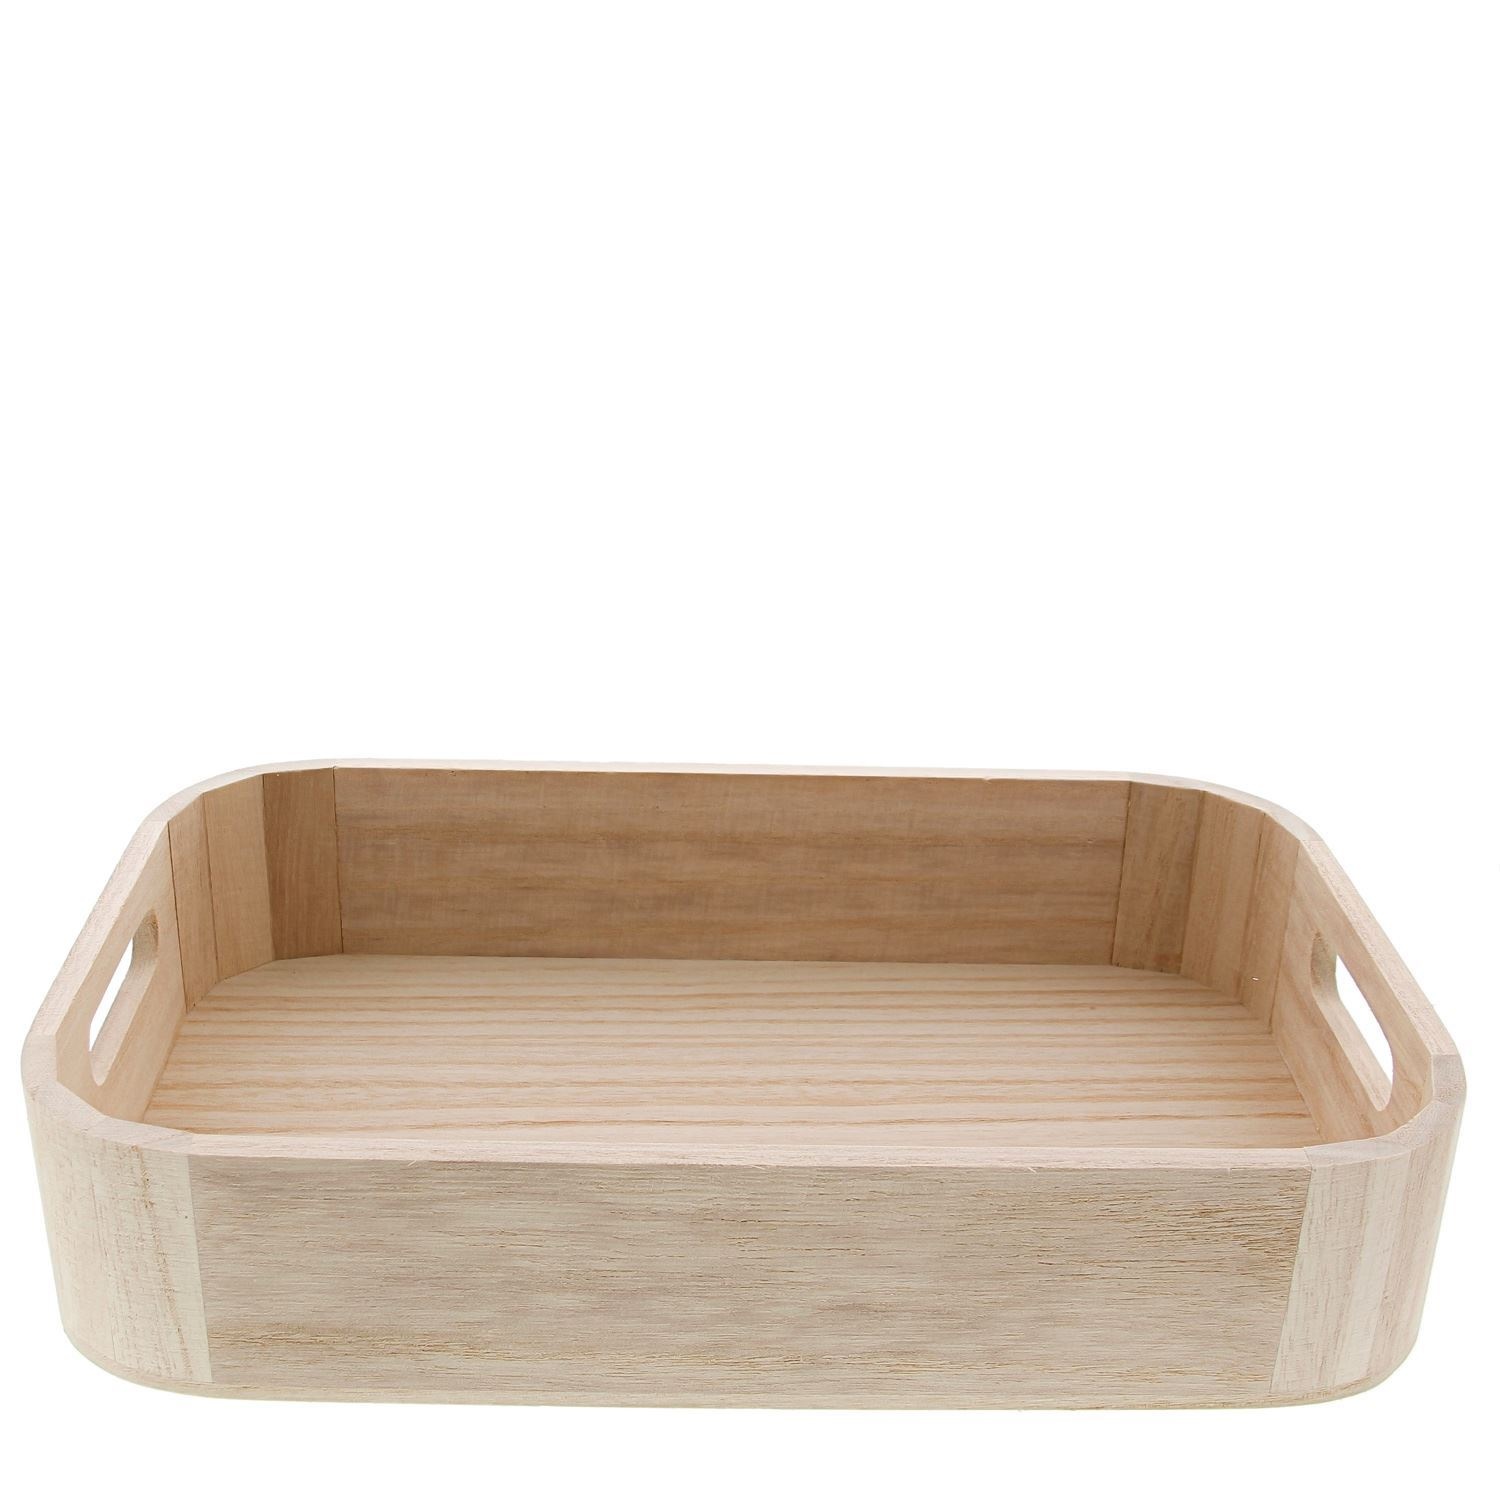 Rectangular tray with handle natural - 280*180*55mm - 6 pieces